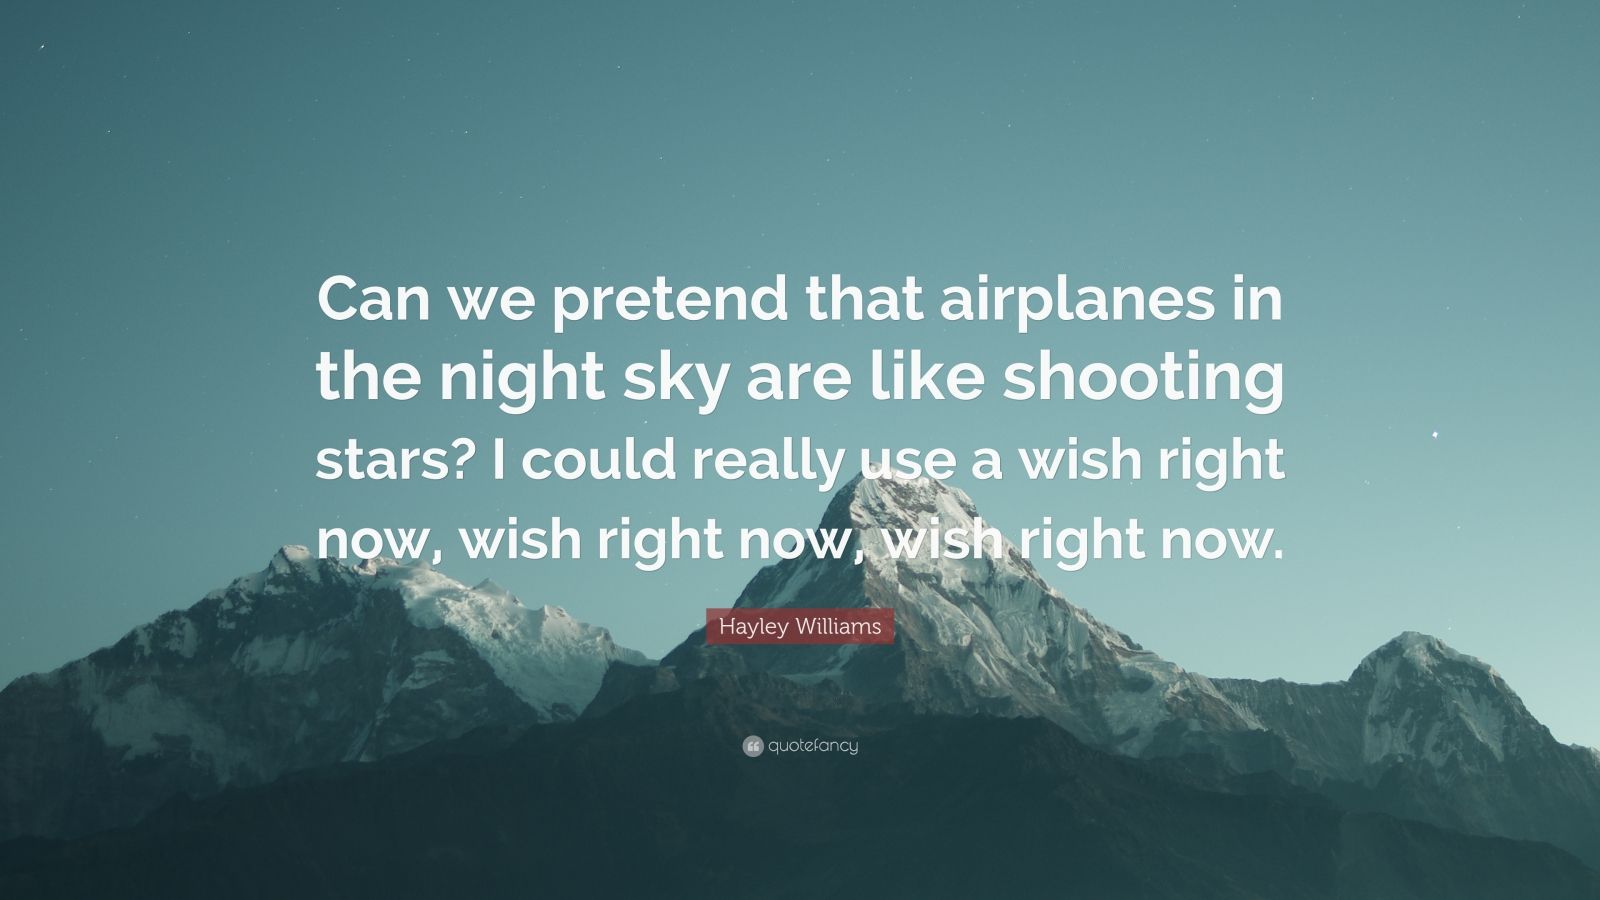 Can We Pretend That Airplanes In The Night Sky Hayley Williams Quote: “Can we pretend that airplanes in the night sky are like shooting stars